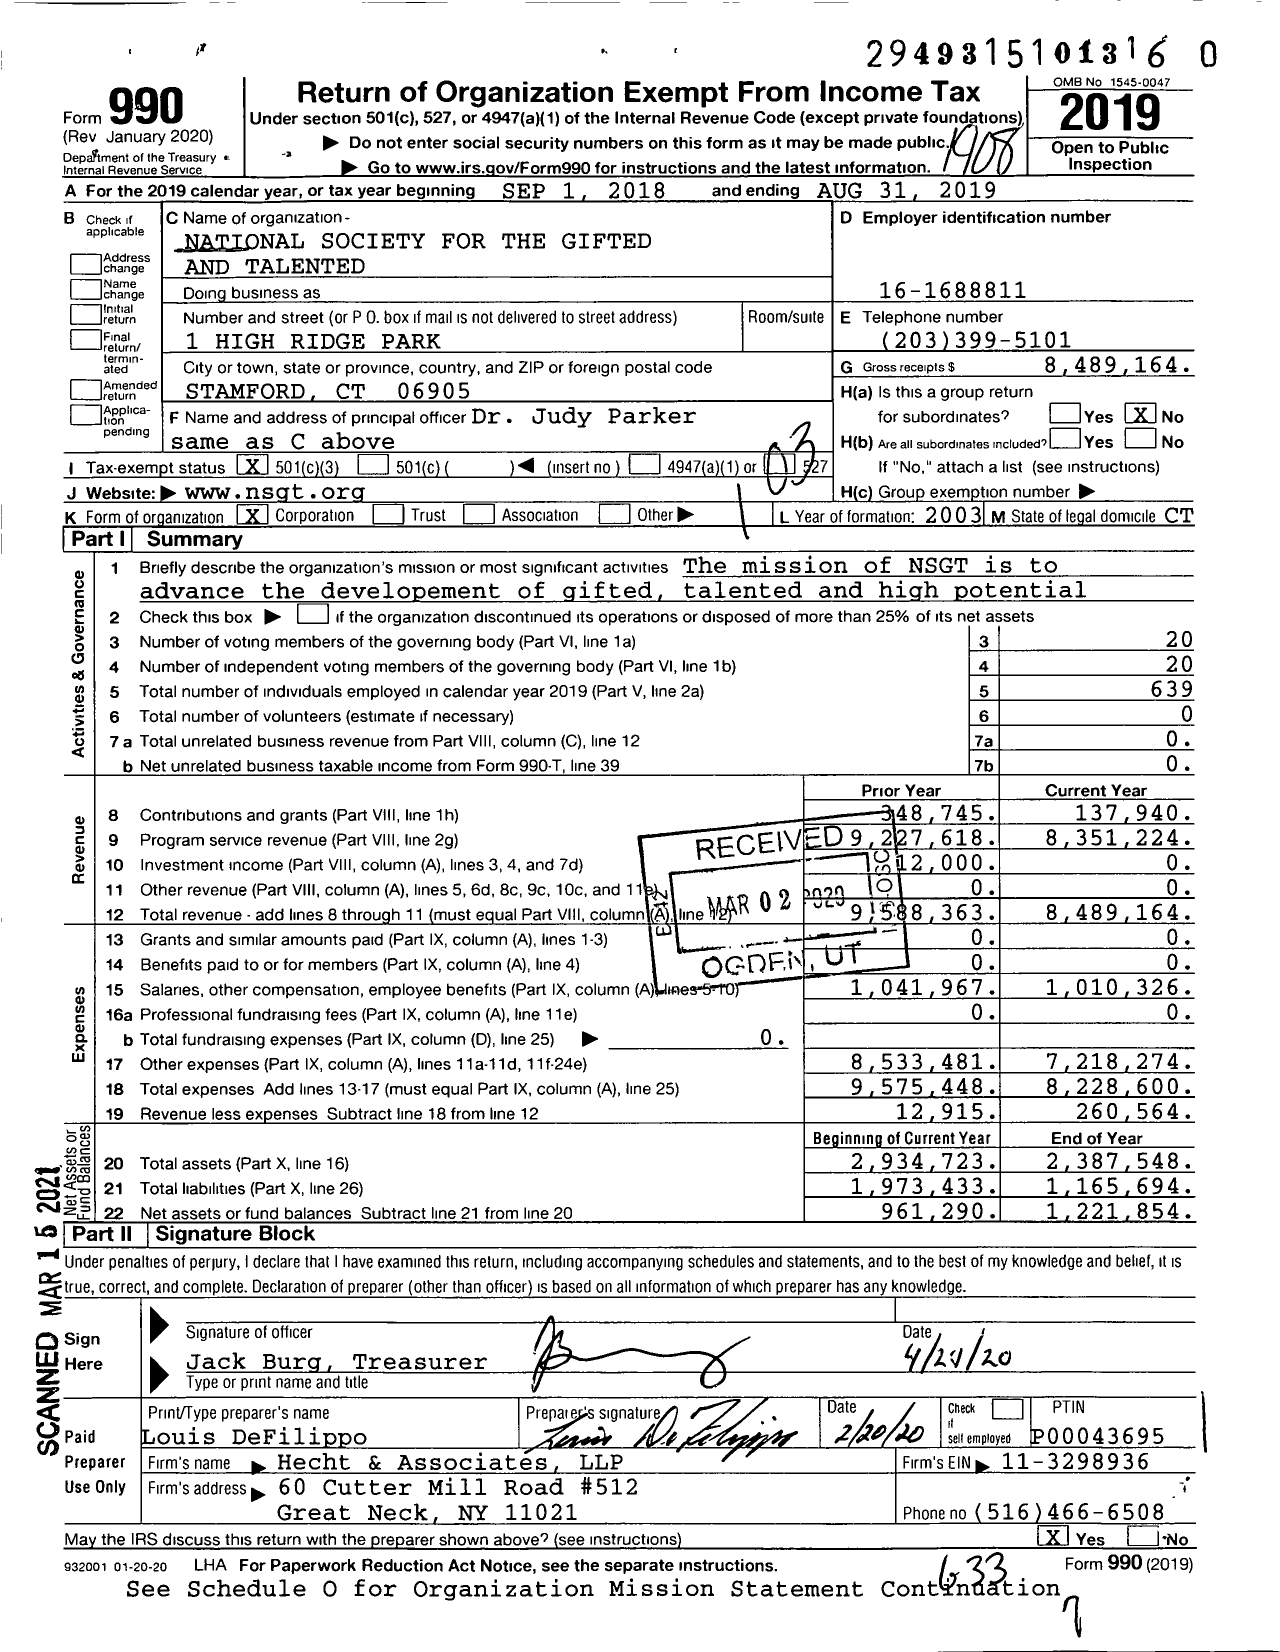 Image of first page of 2018 Form 990 for National Society for the Gifted and Talented (NSGT)